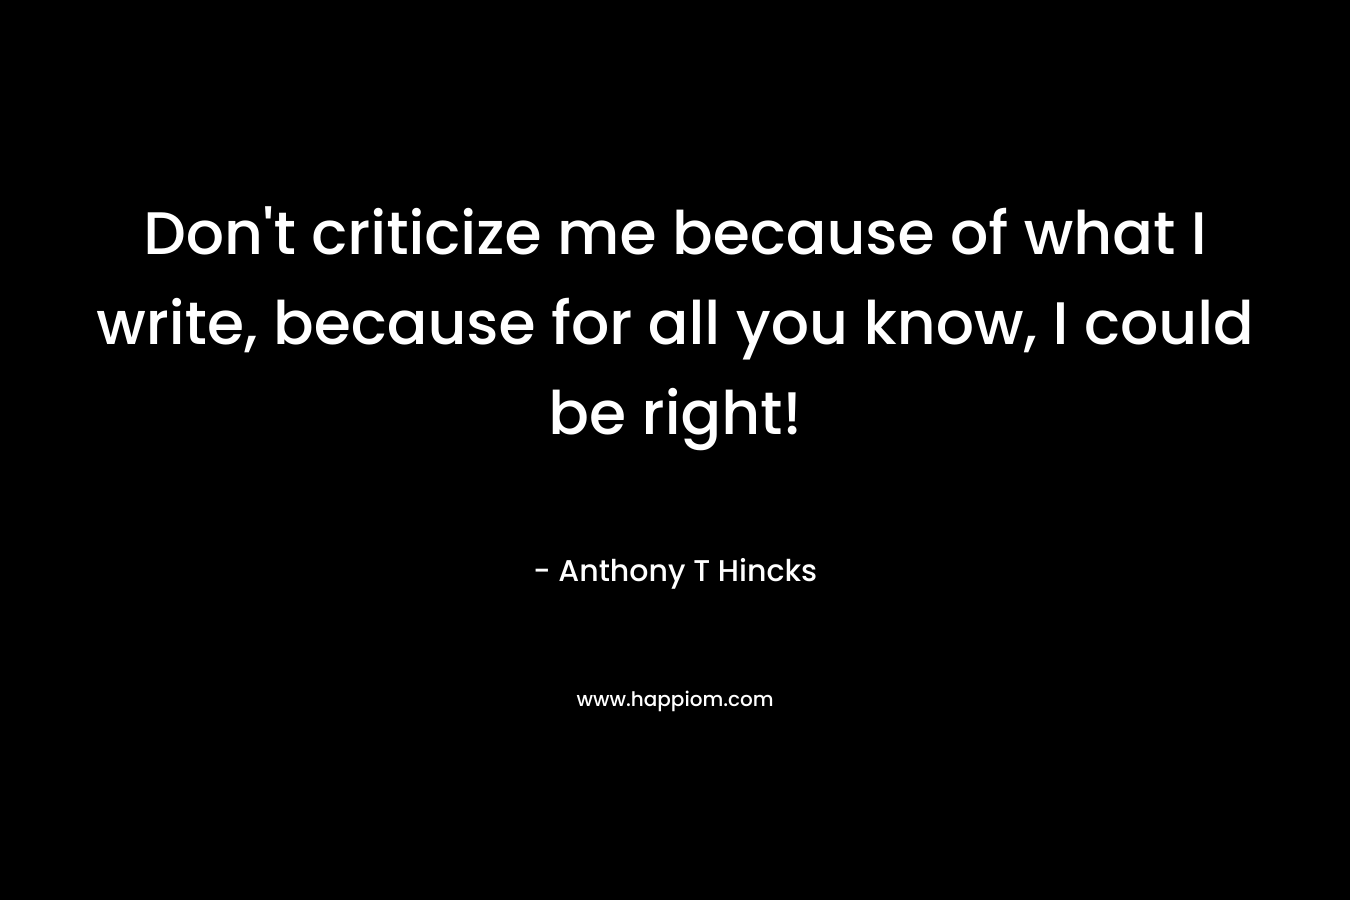 Don't criticize me because of what I write, because for all you know, I could be right!